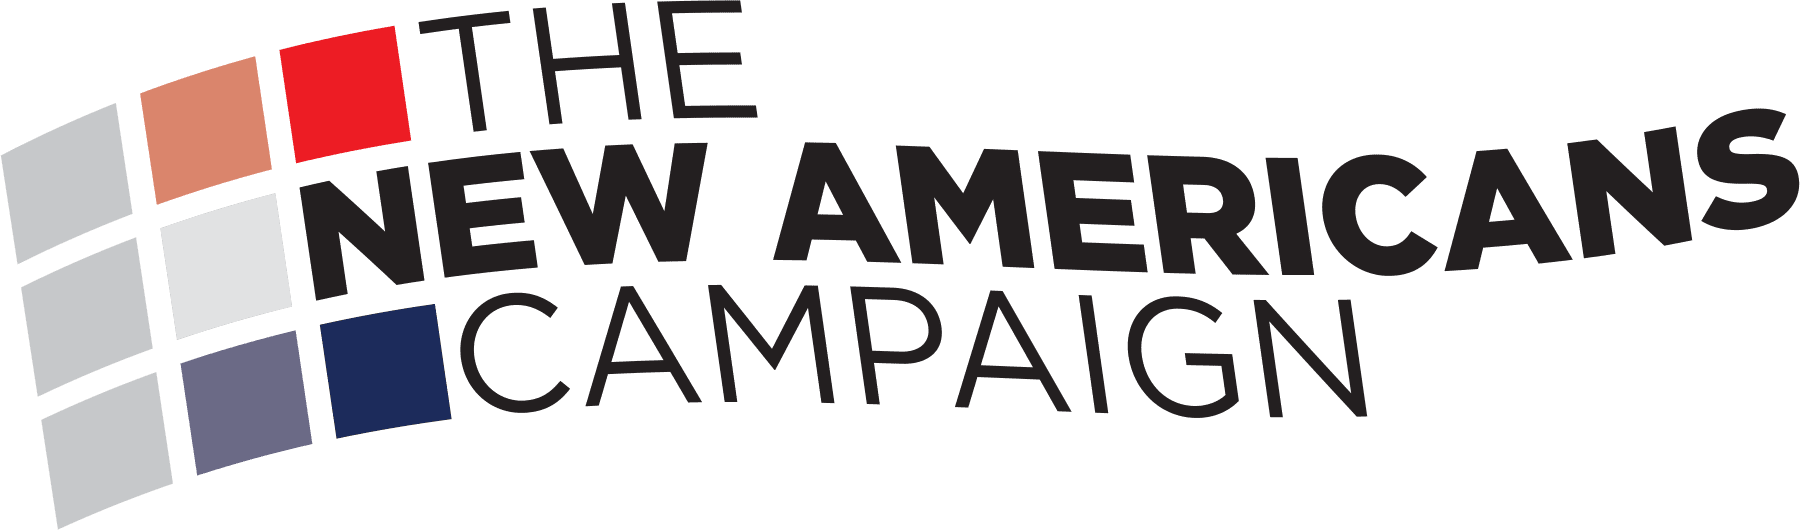 The New Americans Campaign logo